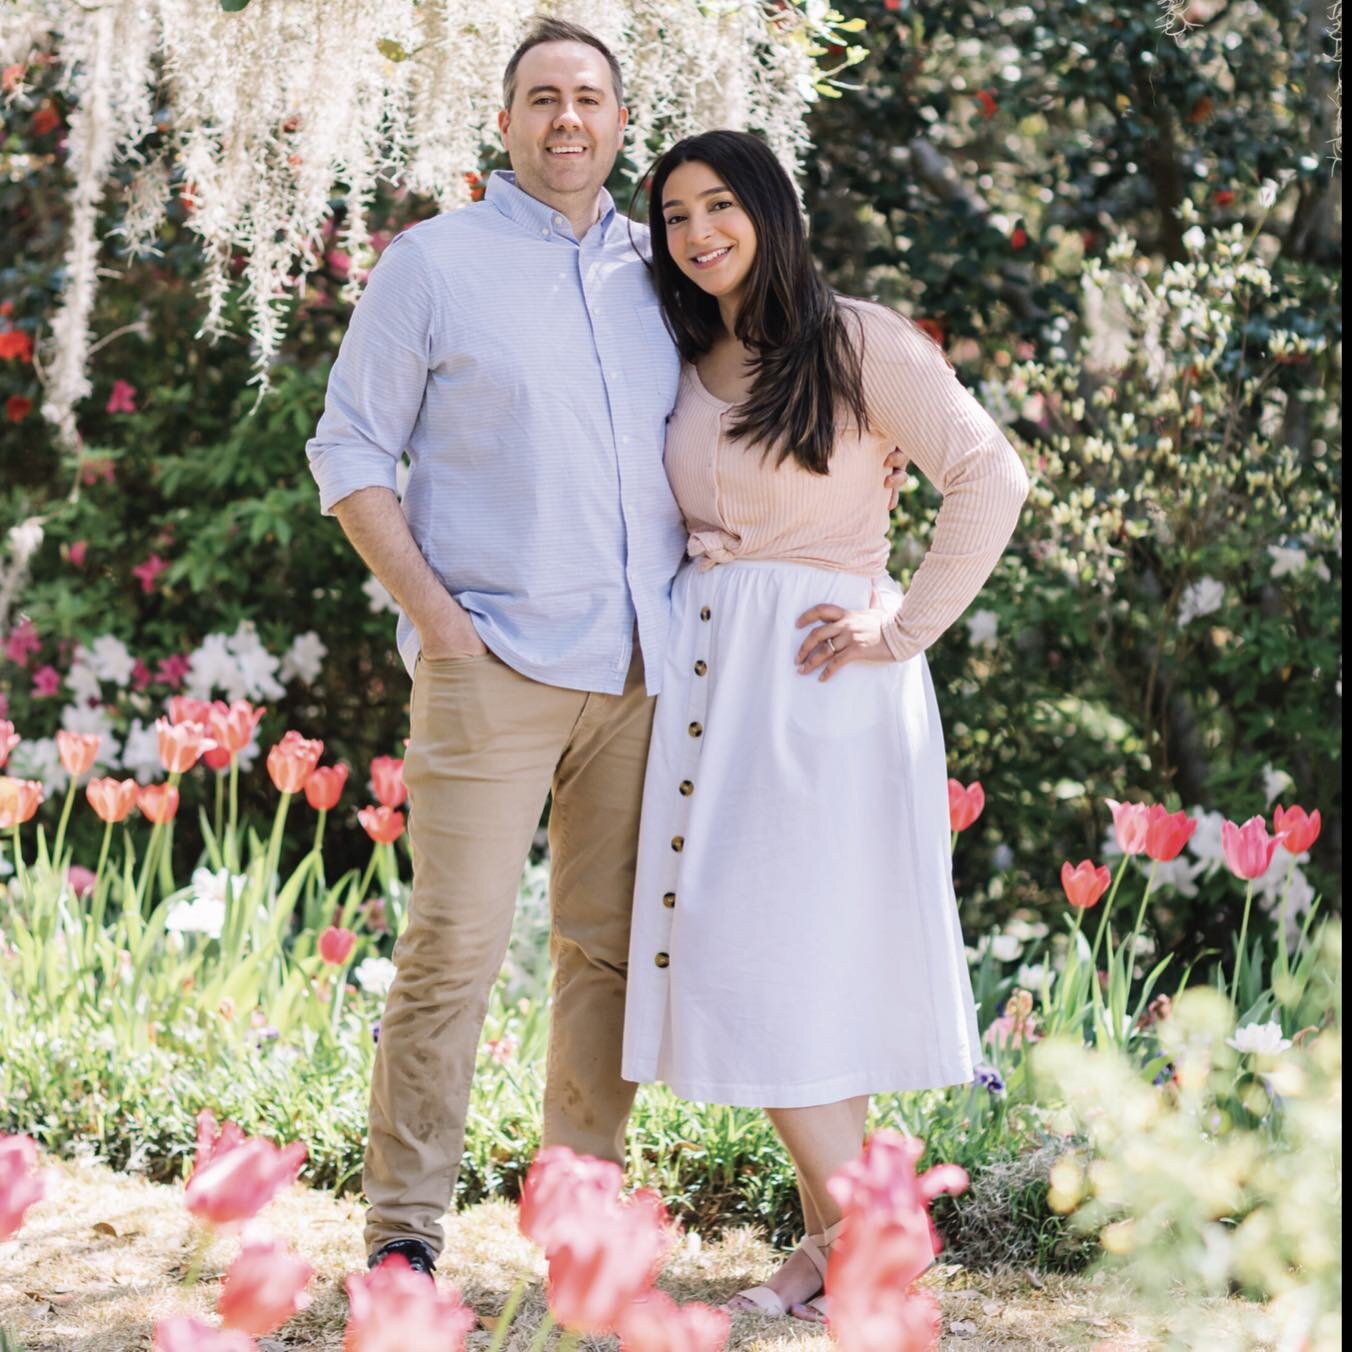 This amazing couple is on the podcast this week! They are Brian and Martha of @marthamydearrentals, a specialty wedding rental company in Wilmington, NC. They are two of the sweetest people I know and I loved learning how they work together as husban